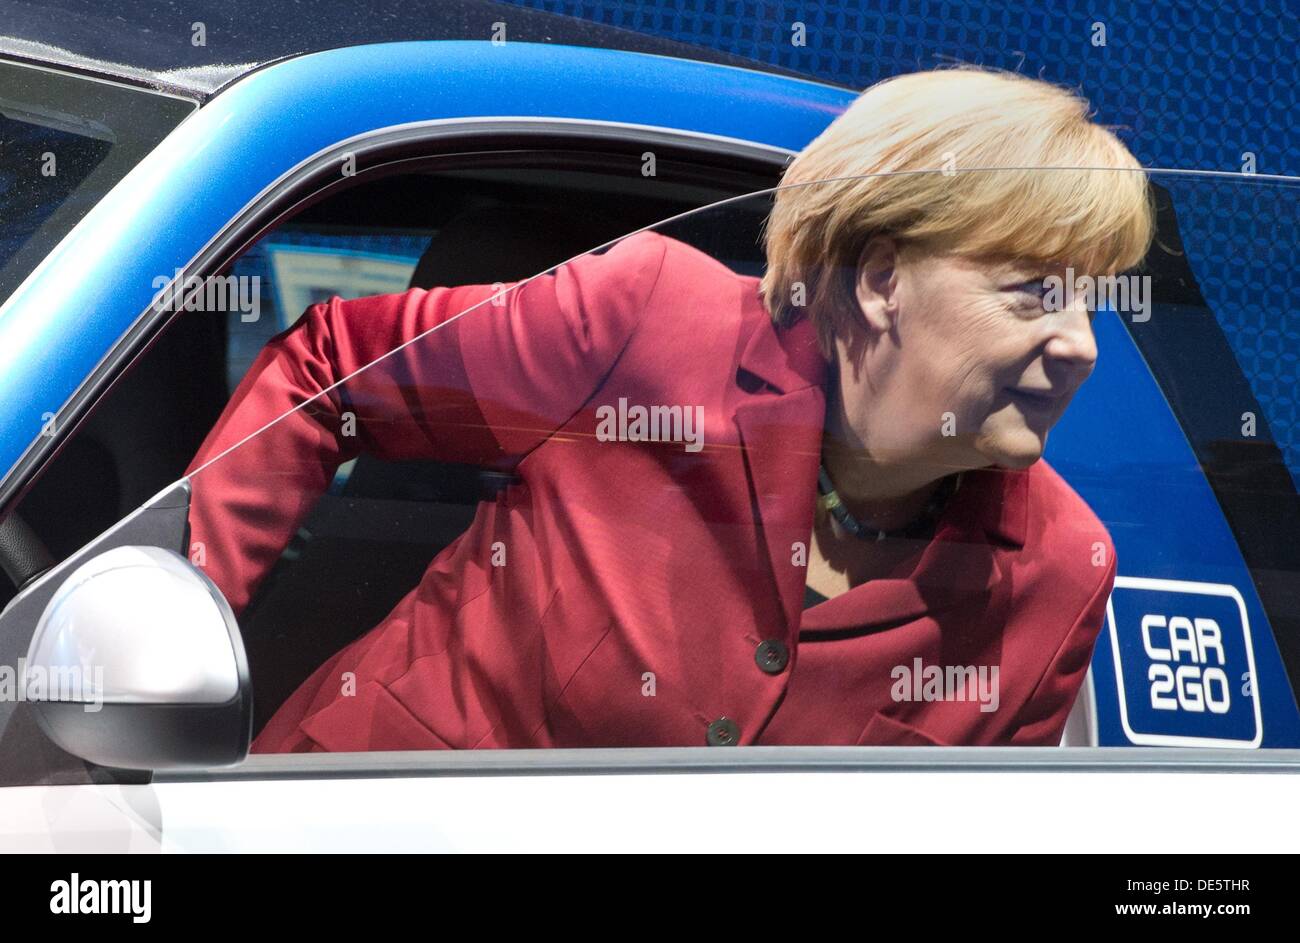 Frankfurt Main, Germany. 12th Sep, 2013. German Chancellor Angela Merkel gets out of a Smart Electric Drive at the International Motor Show (IAA) in Frankfurt Main, Germany, 12 September 2013. Almost 1100 exhibitors from around the world present novelties at the world's largest automobile show IAA until 22 September 2013. Photo: BORIS ROESSLER/dpa/Alamy Live News Stock Photo